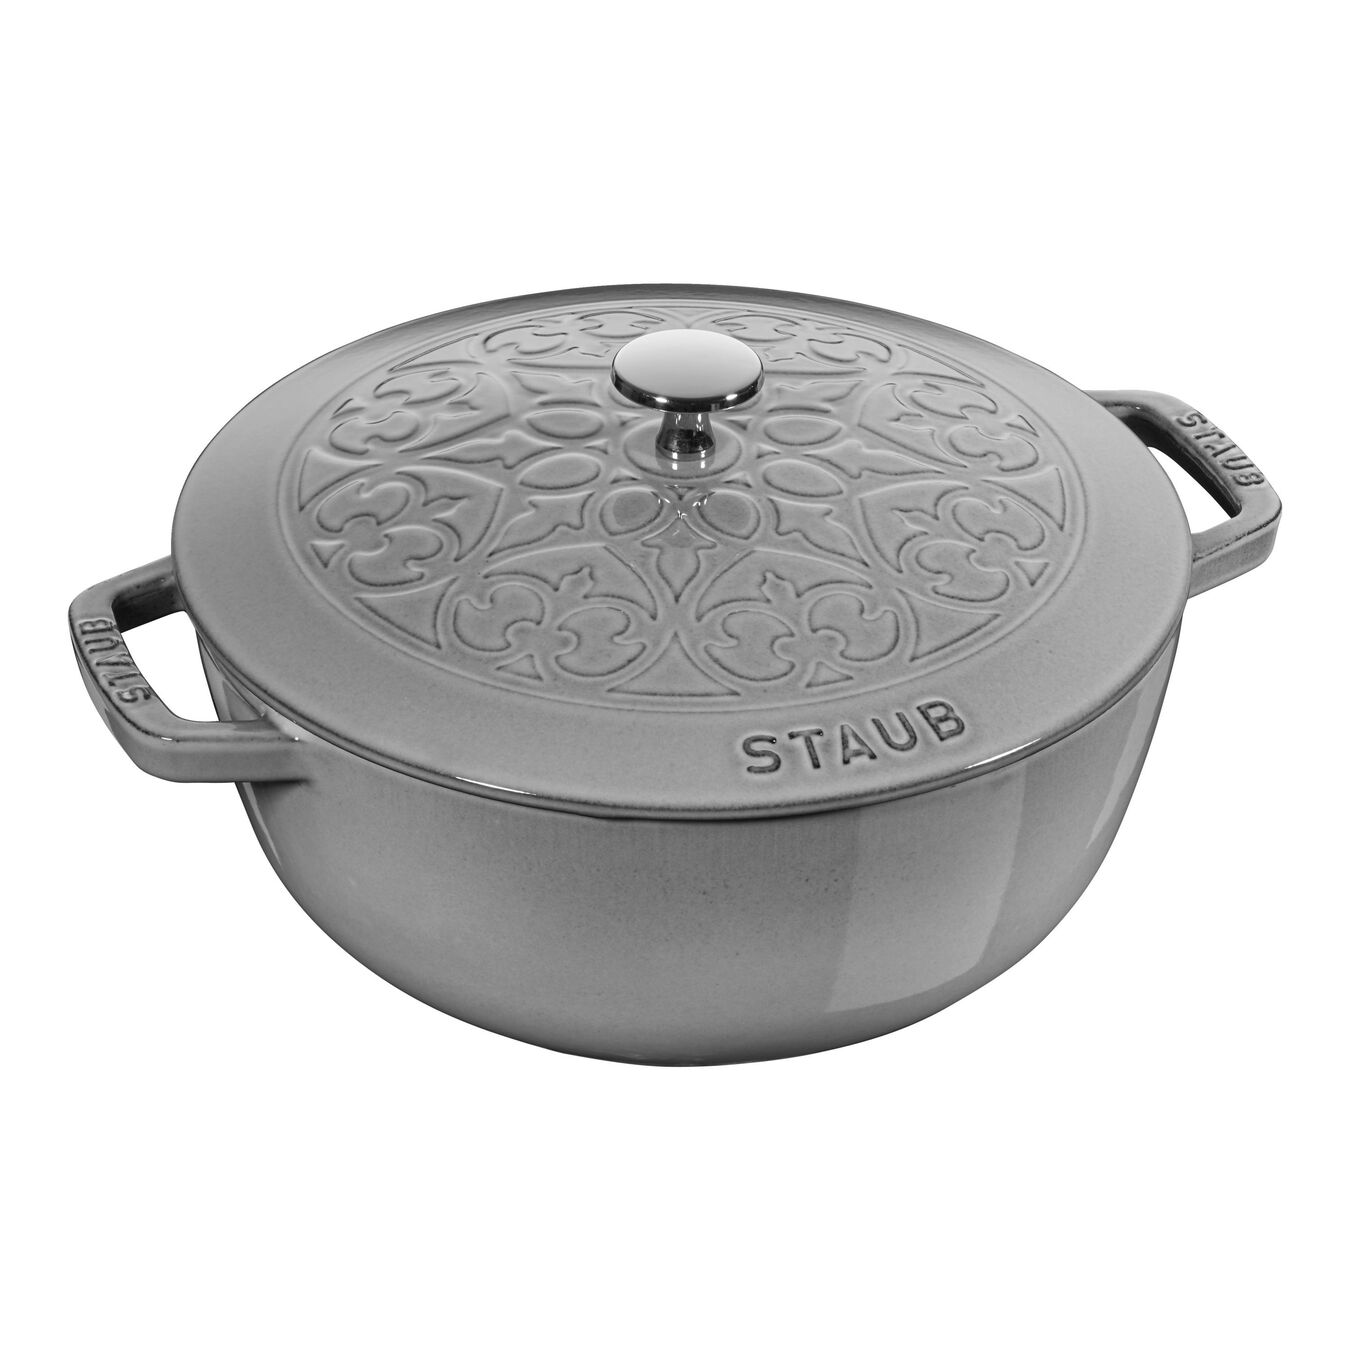 Essential French Oven with lily lid and trivet 2 Piece, cast iron,,large 2